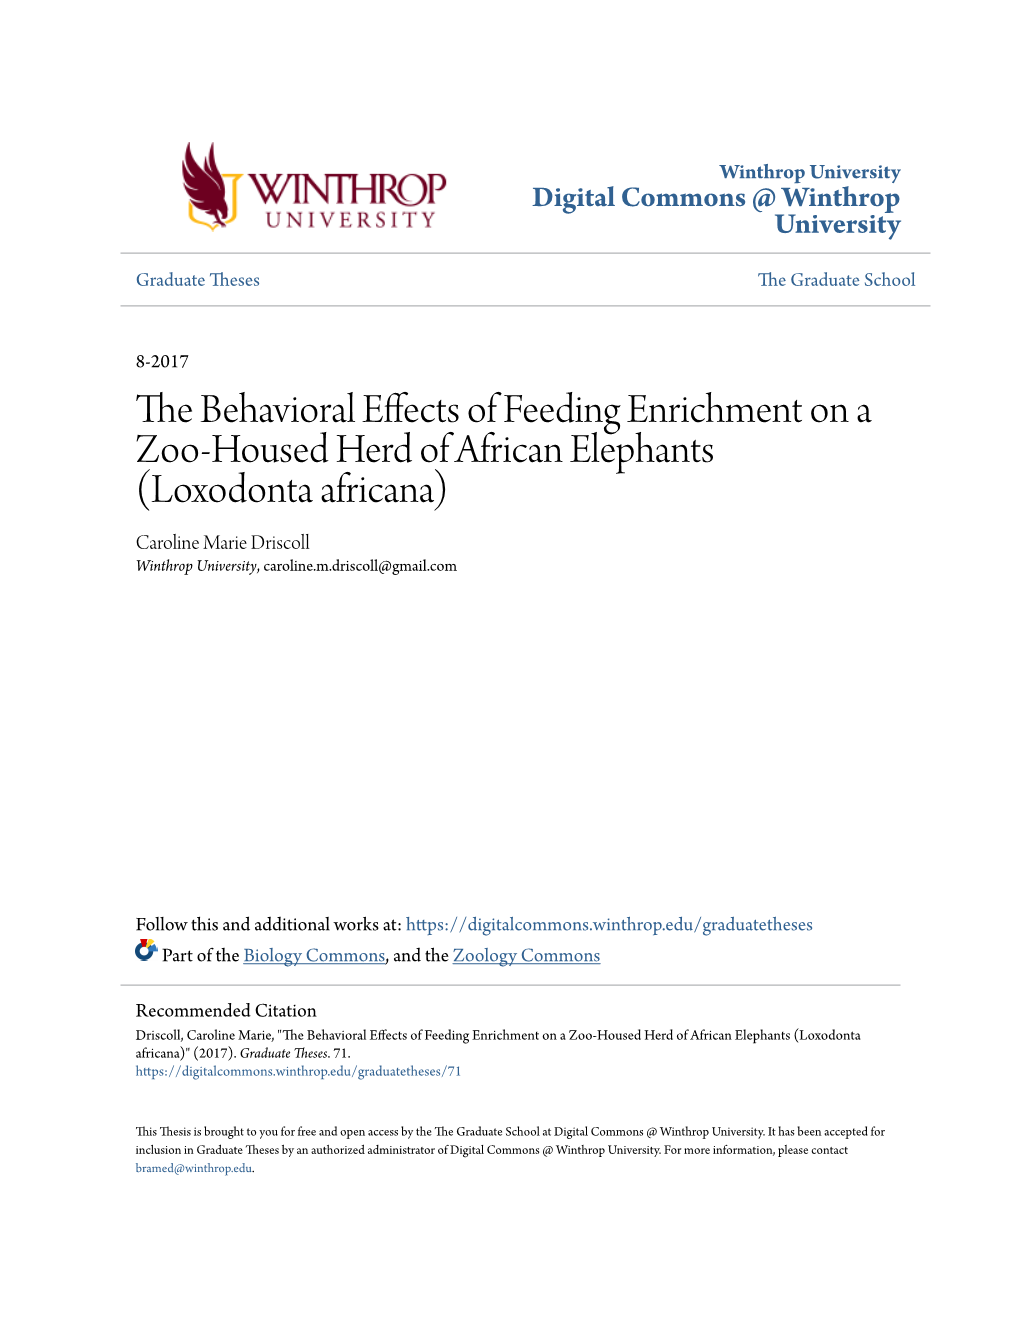 The Behavioral Effects of Feeding Enrichment on a Zoo-Housed Herd of African Elephants (Loxodonta Africana)